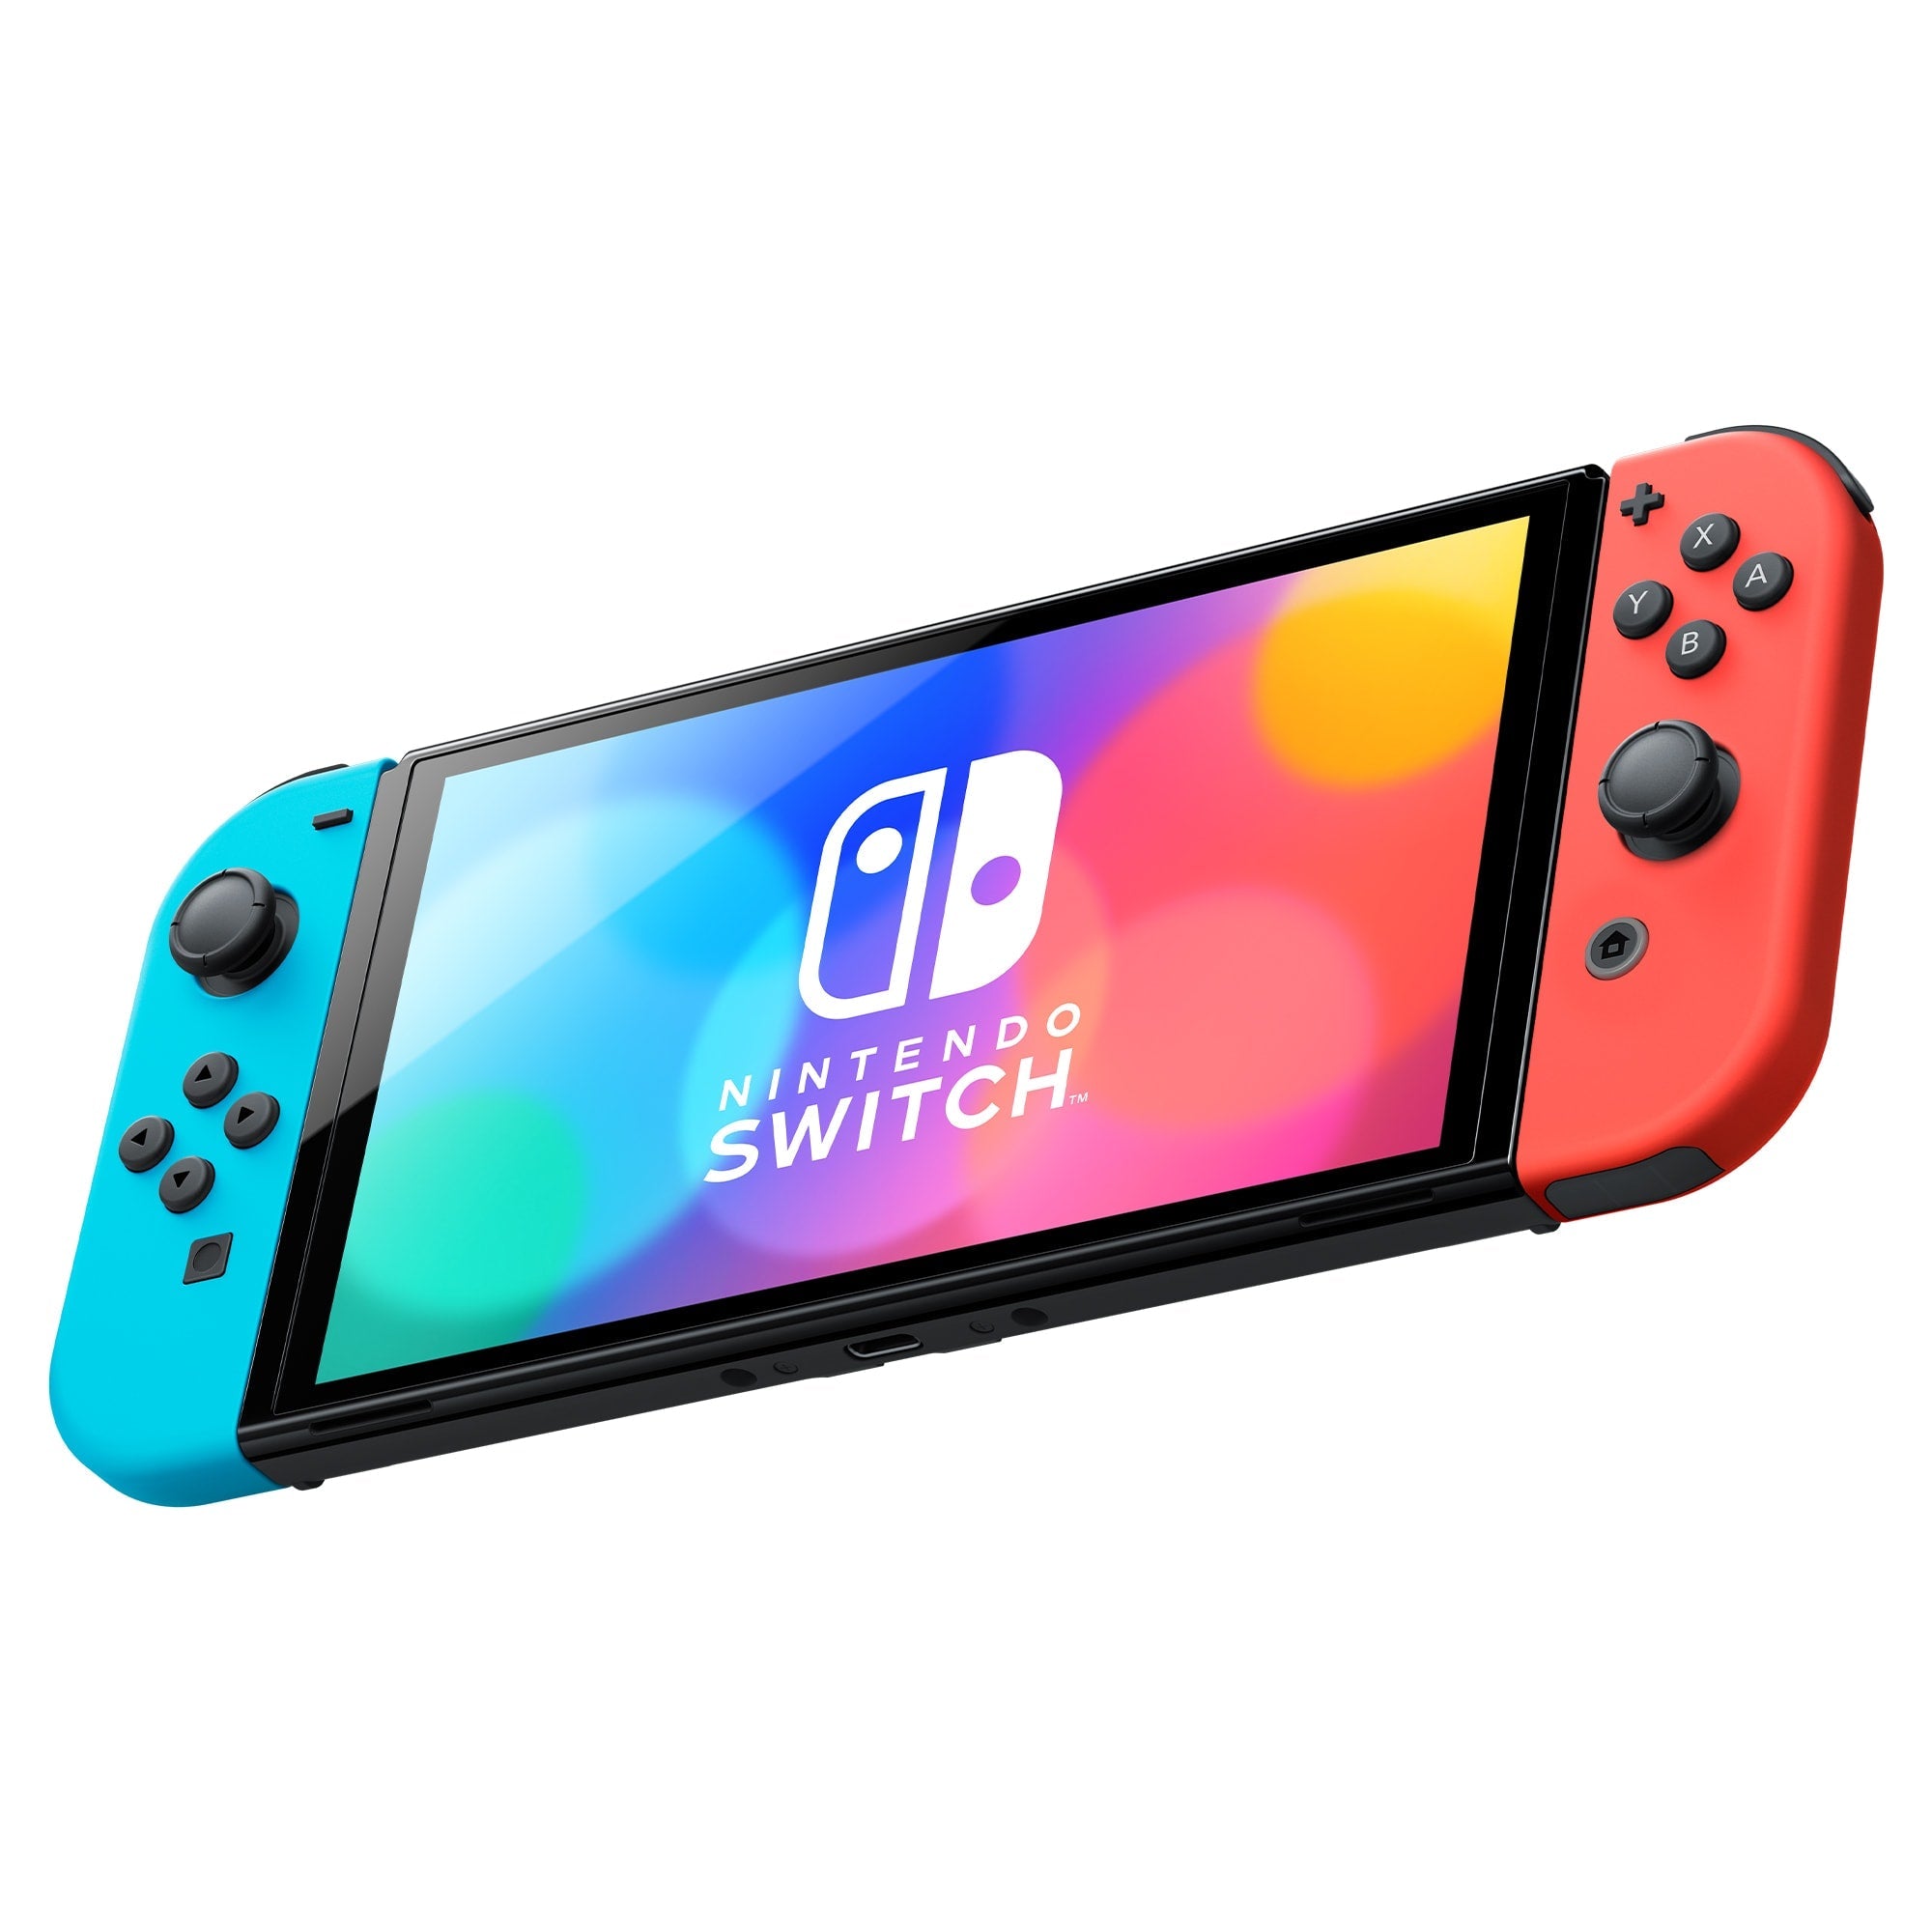 Nintendo Switch OLED Model 64GB Blue / Red - New